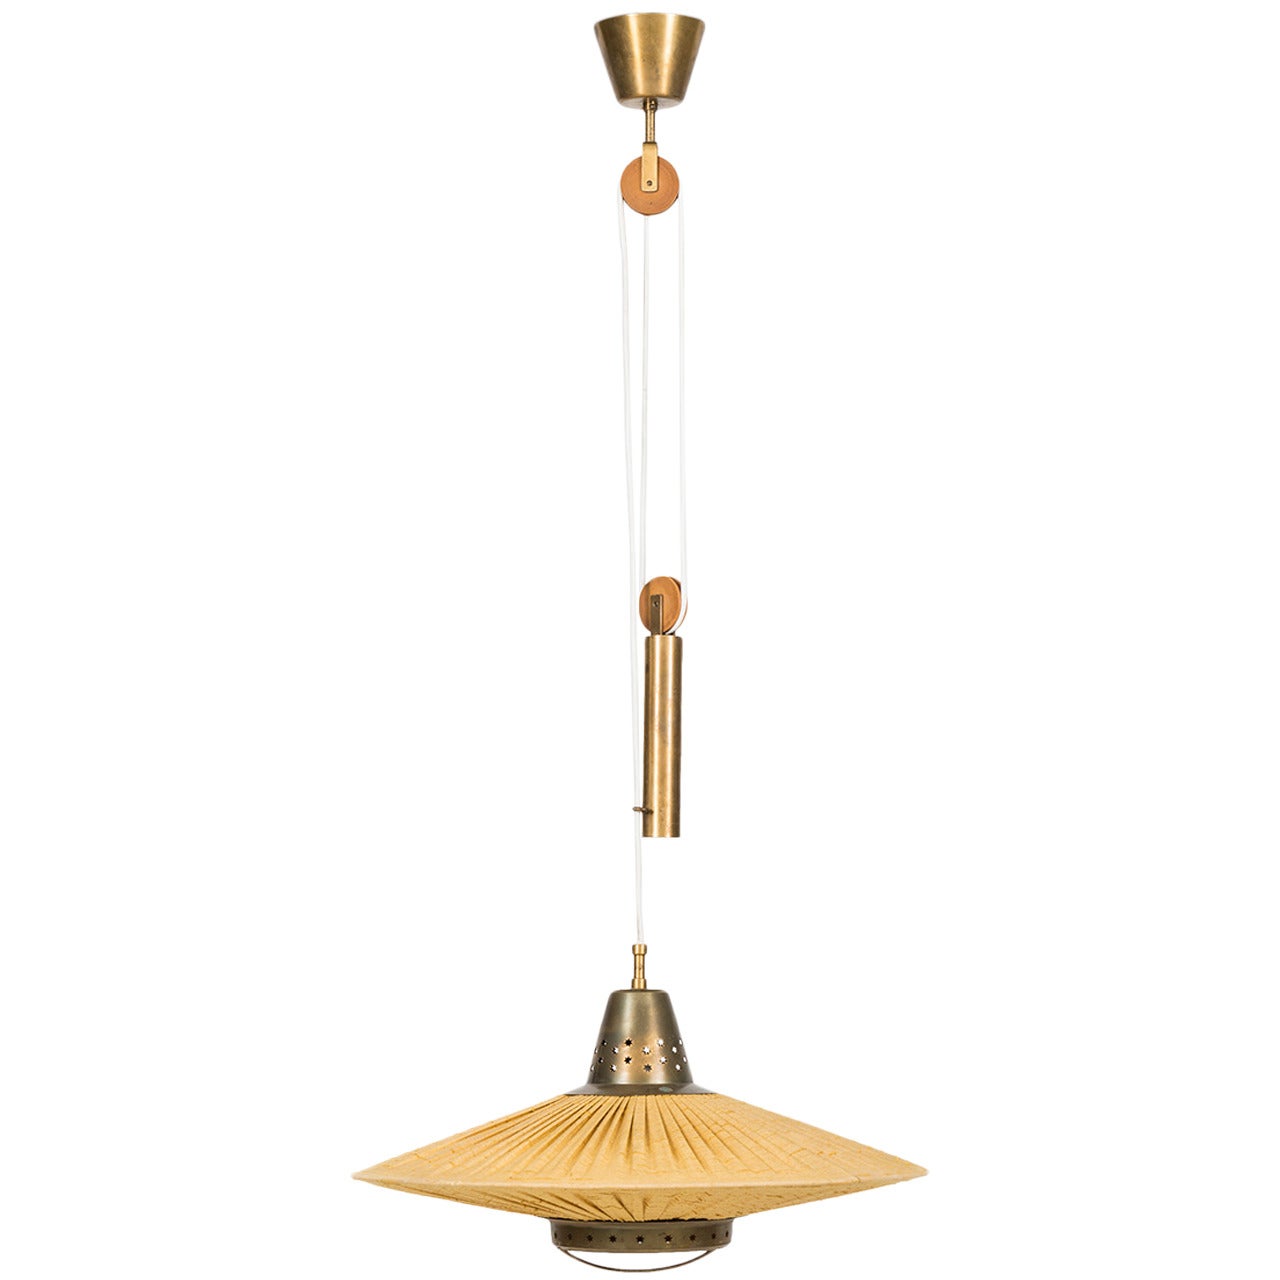 Ceiling Lamp Attributed to Hans Bergström, Produced by Bergbom, Sweden